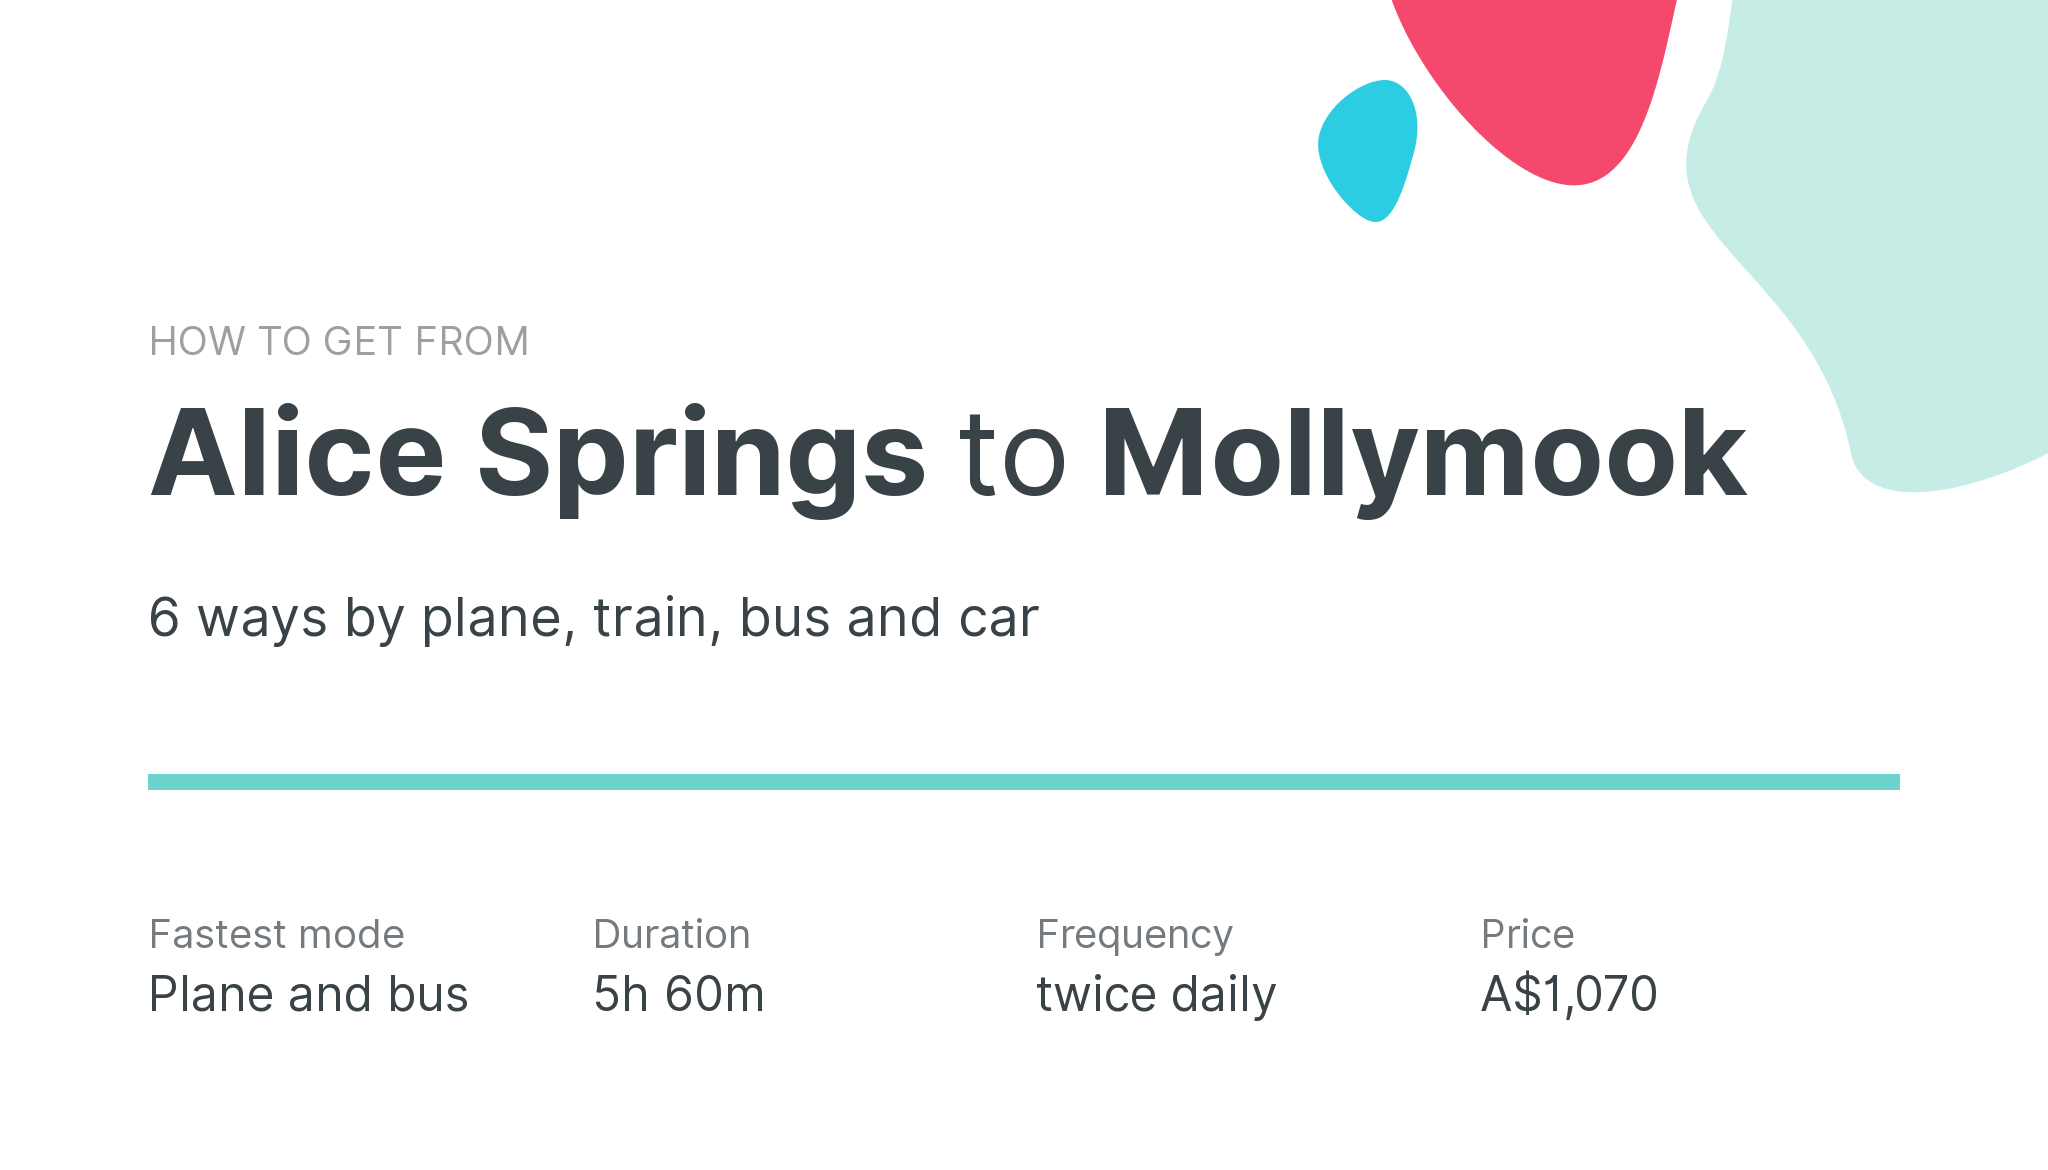 How do I get from Alice Springs to Mollymook